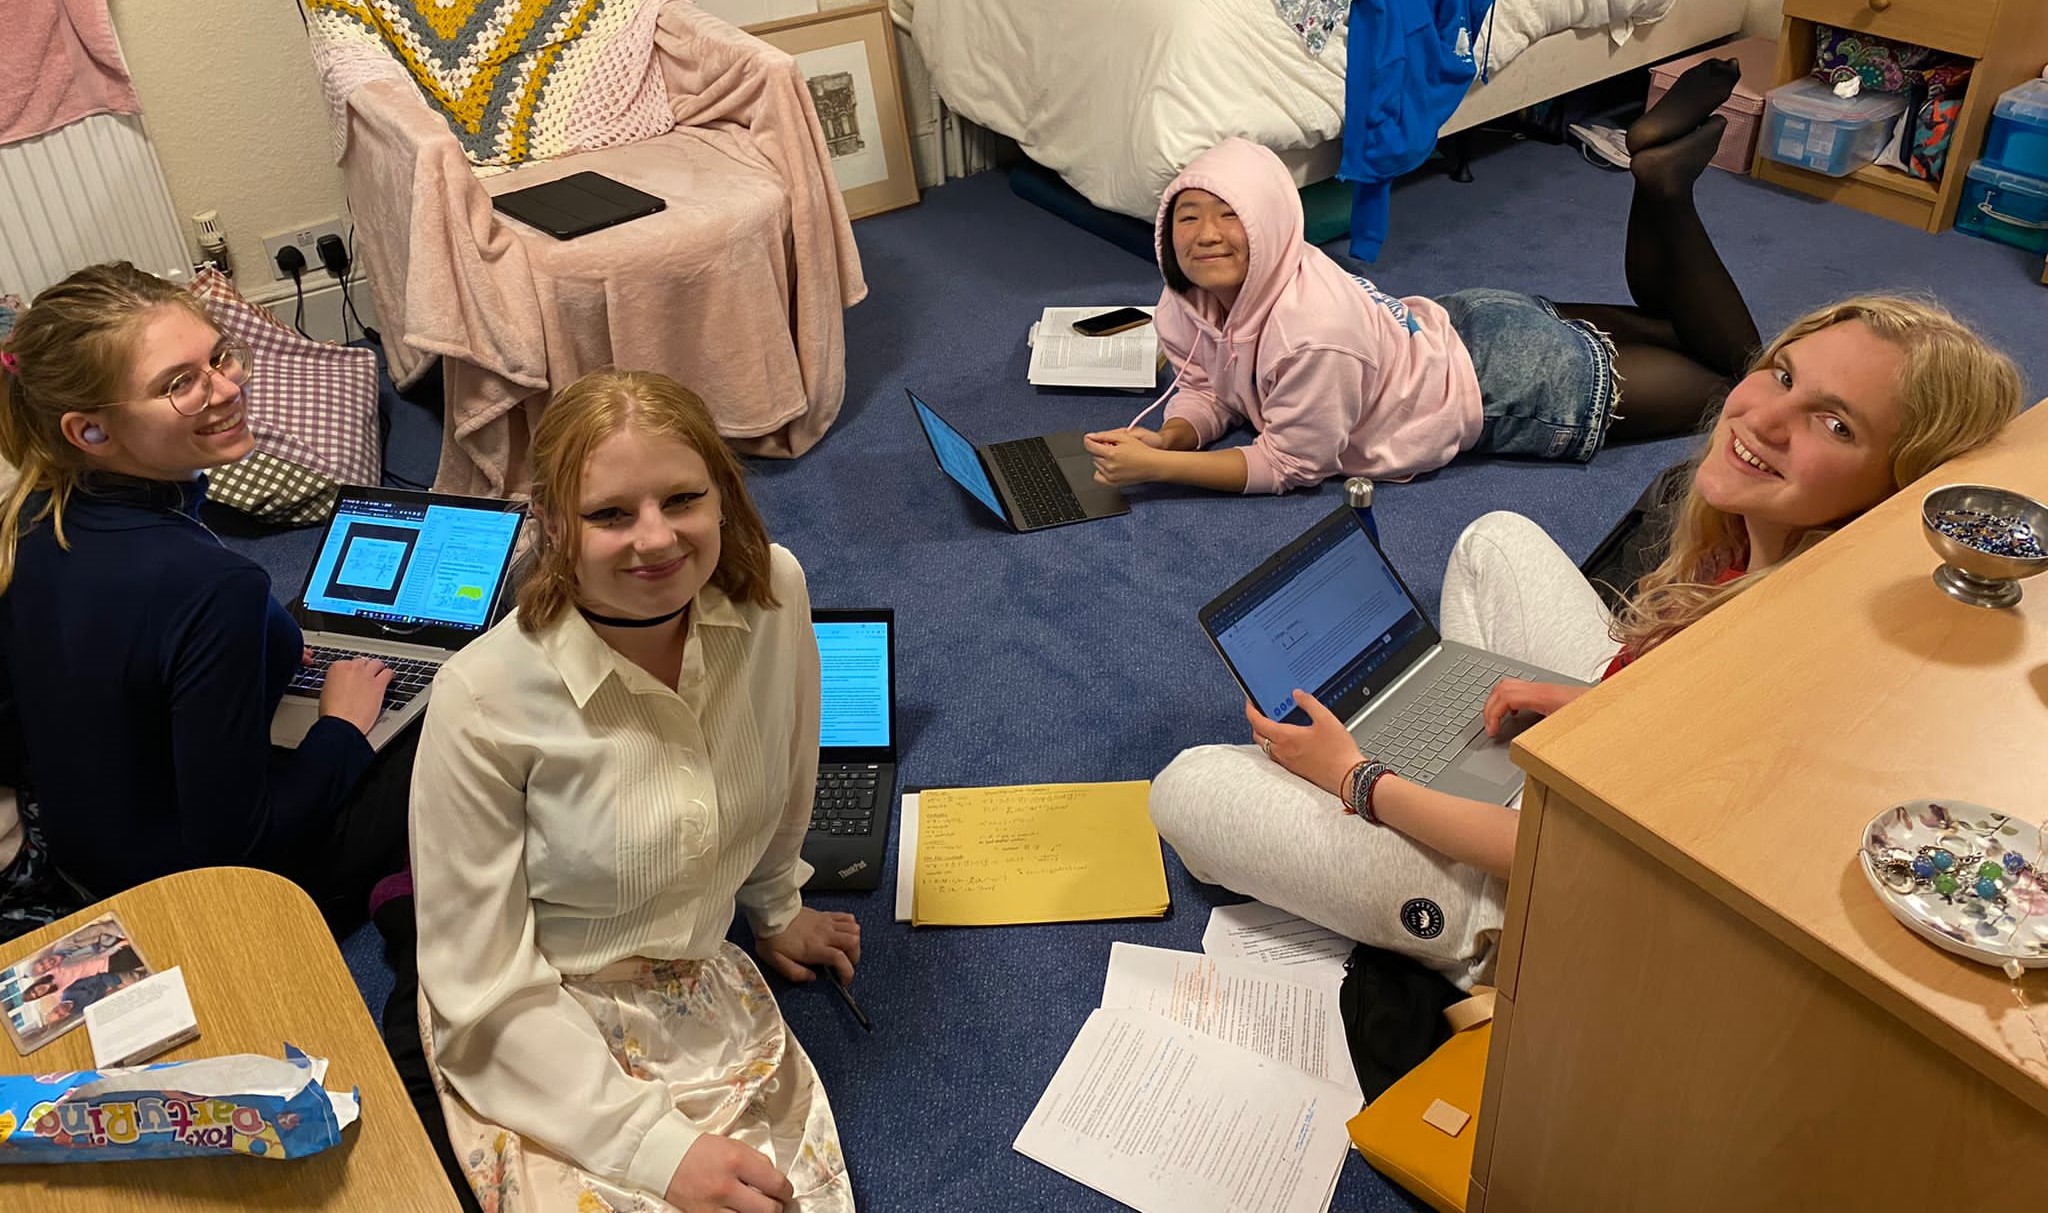 Four students lying on the floor of a slightly chaotic room, with laptops